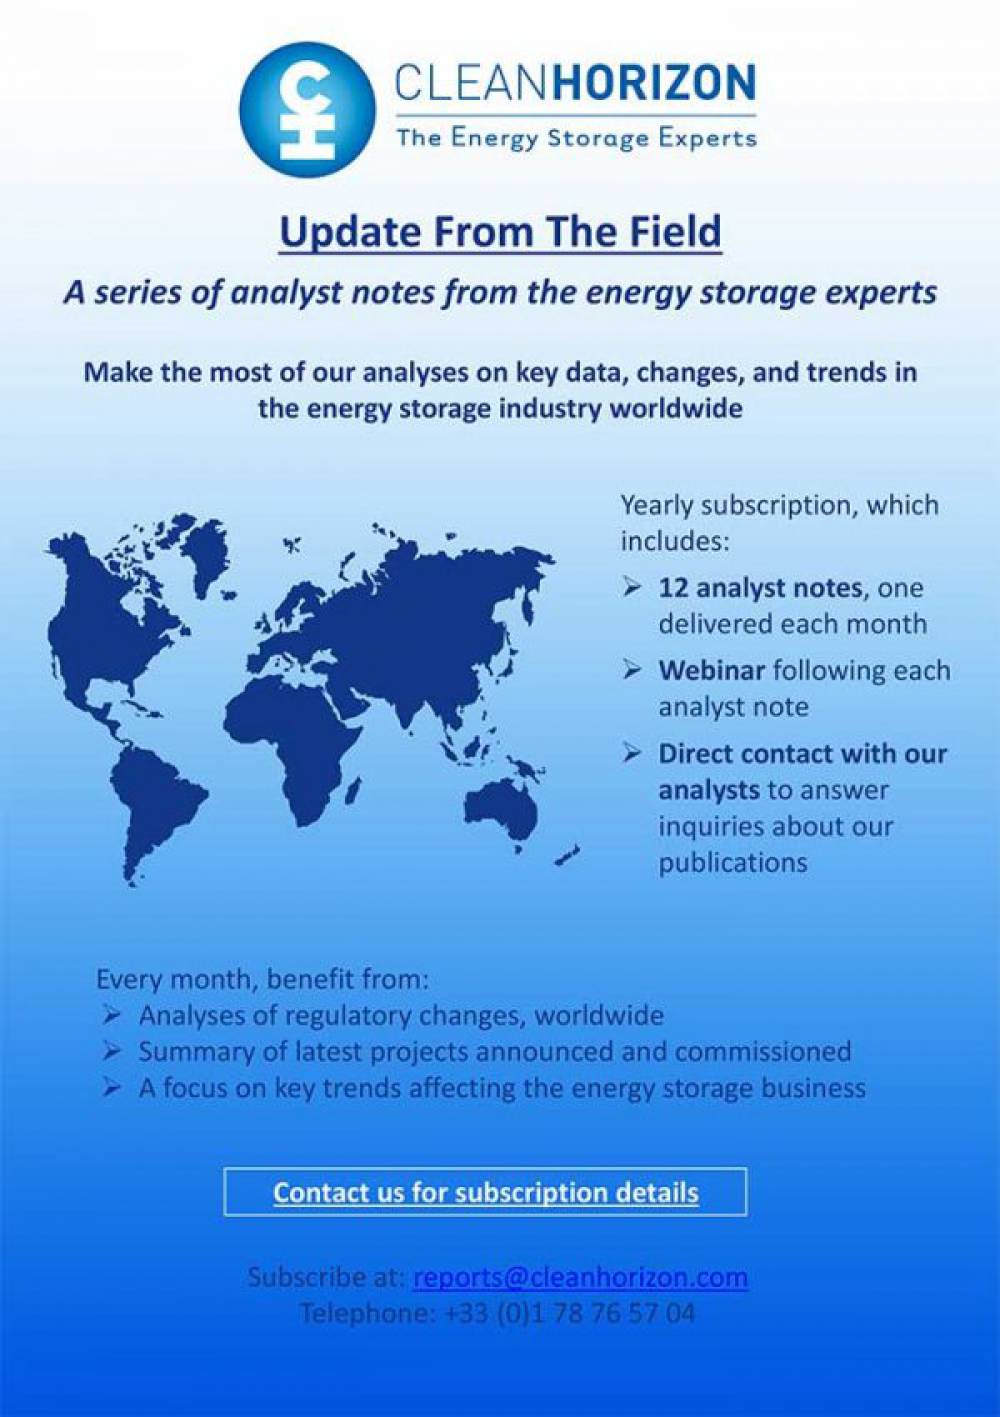 Update From The Field October 2018: The impact of commodity prices on the cost of Li-ion batteries